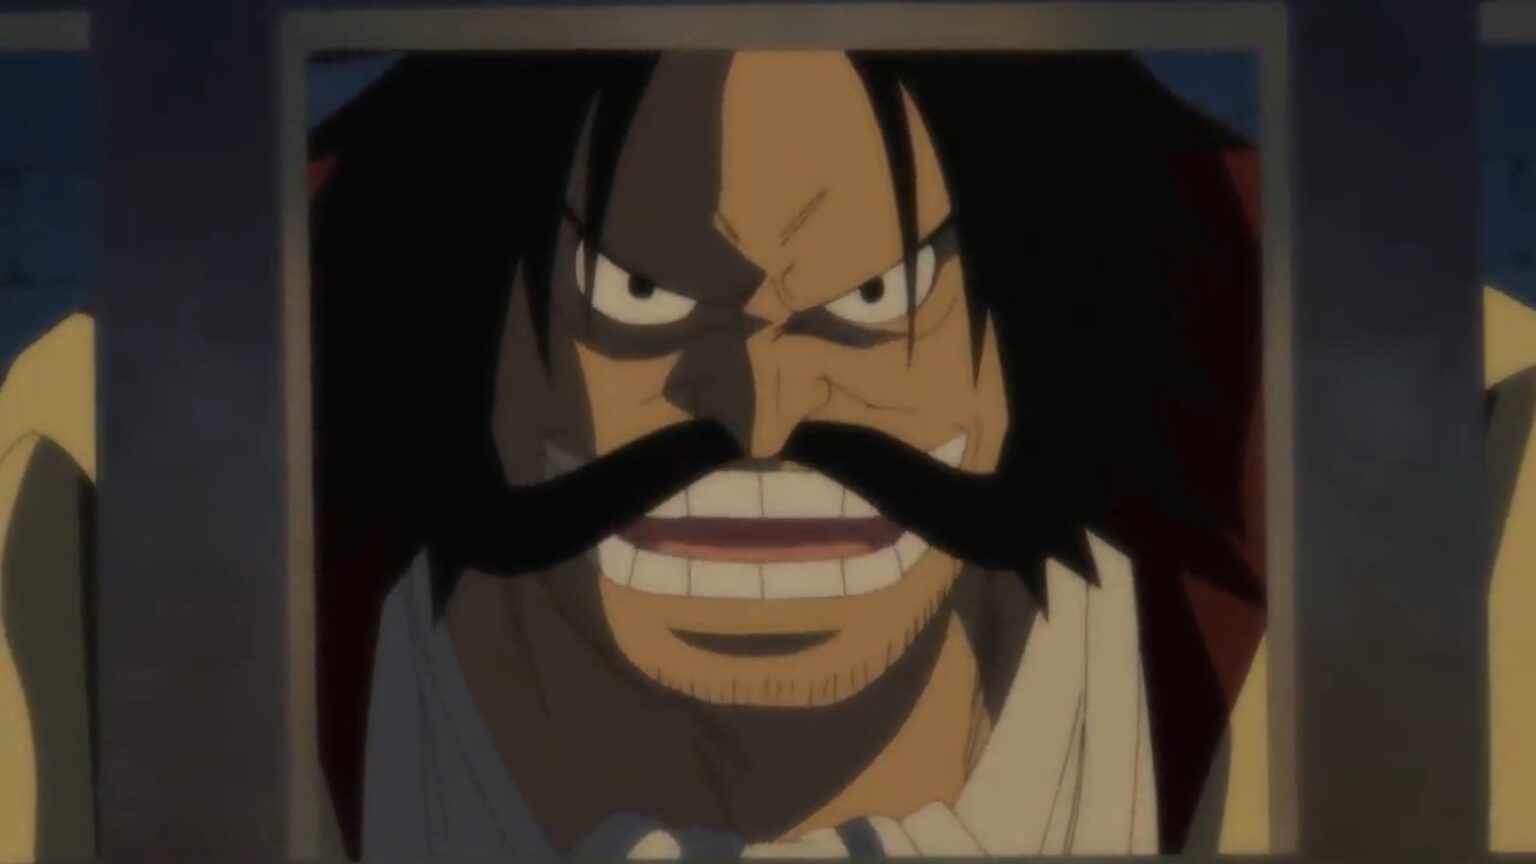 Gol D Roger by his real name is also known as the King of the Pirates and has the highest known bounty in One Piece